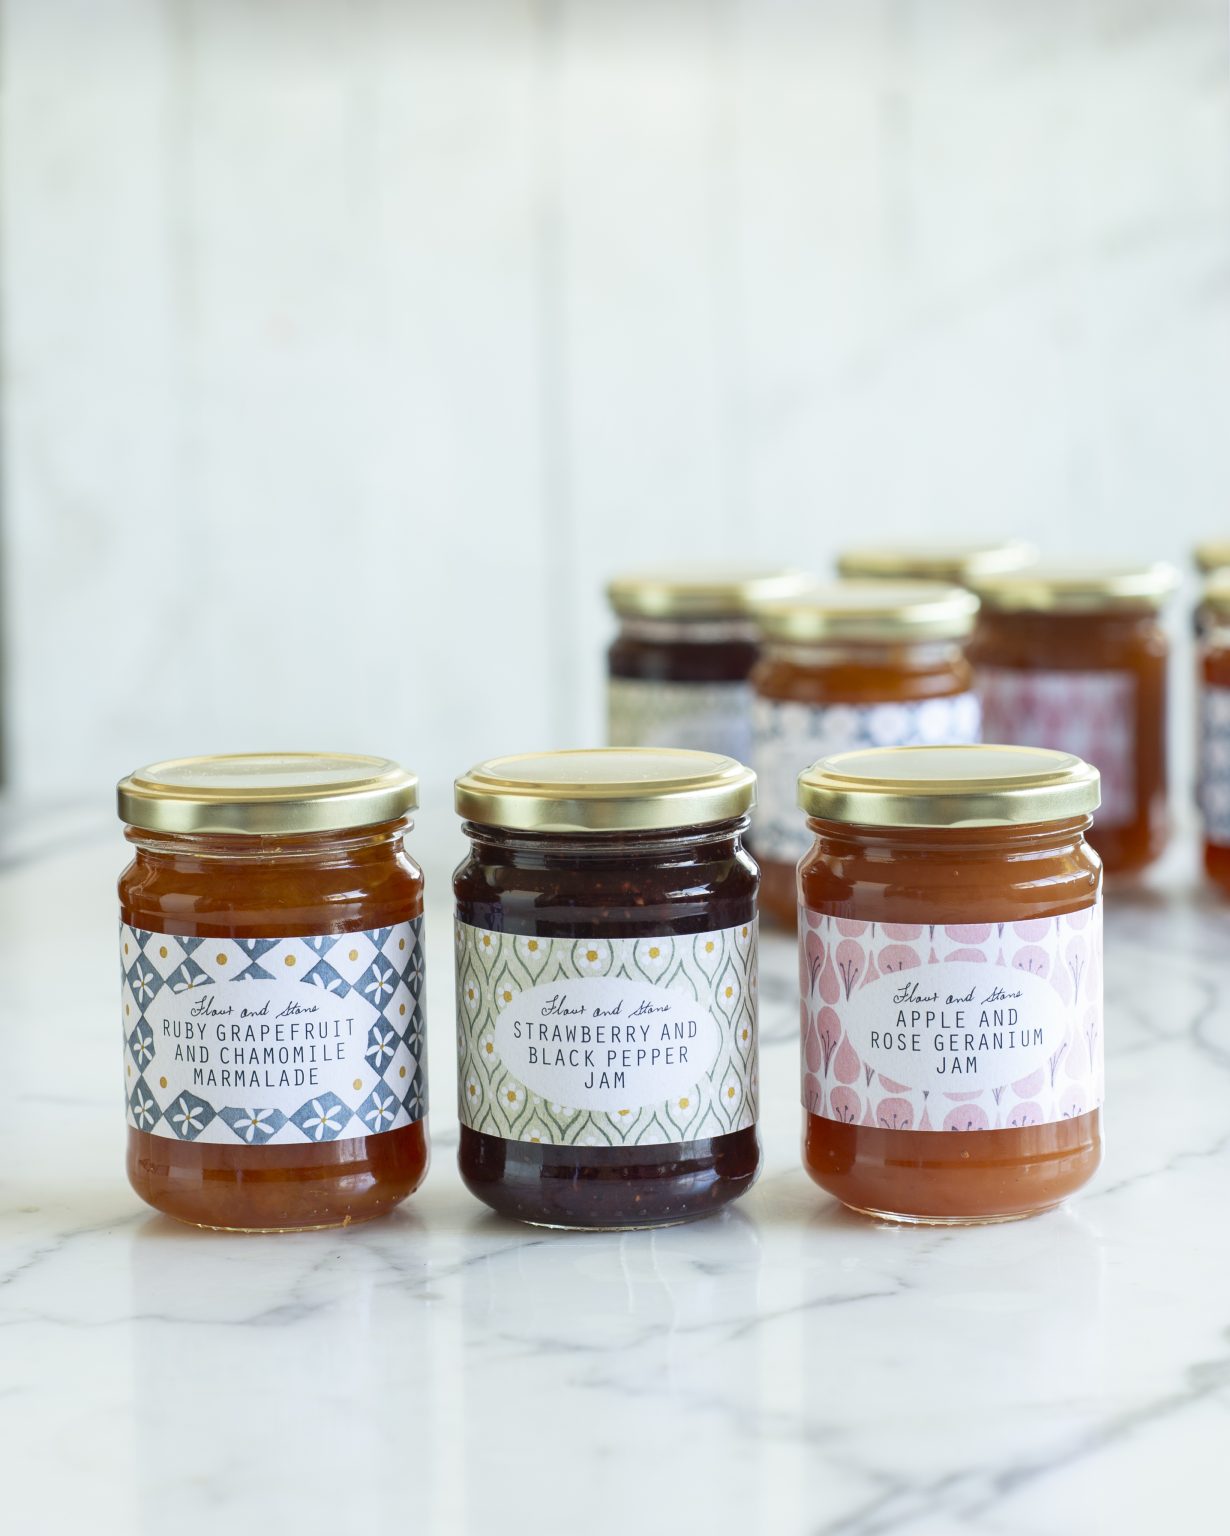 Flour & Stone jams: Handcrafted preserves bursting with flavor